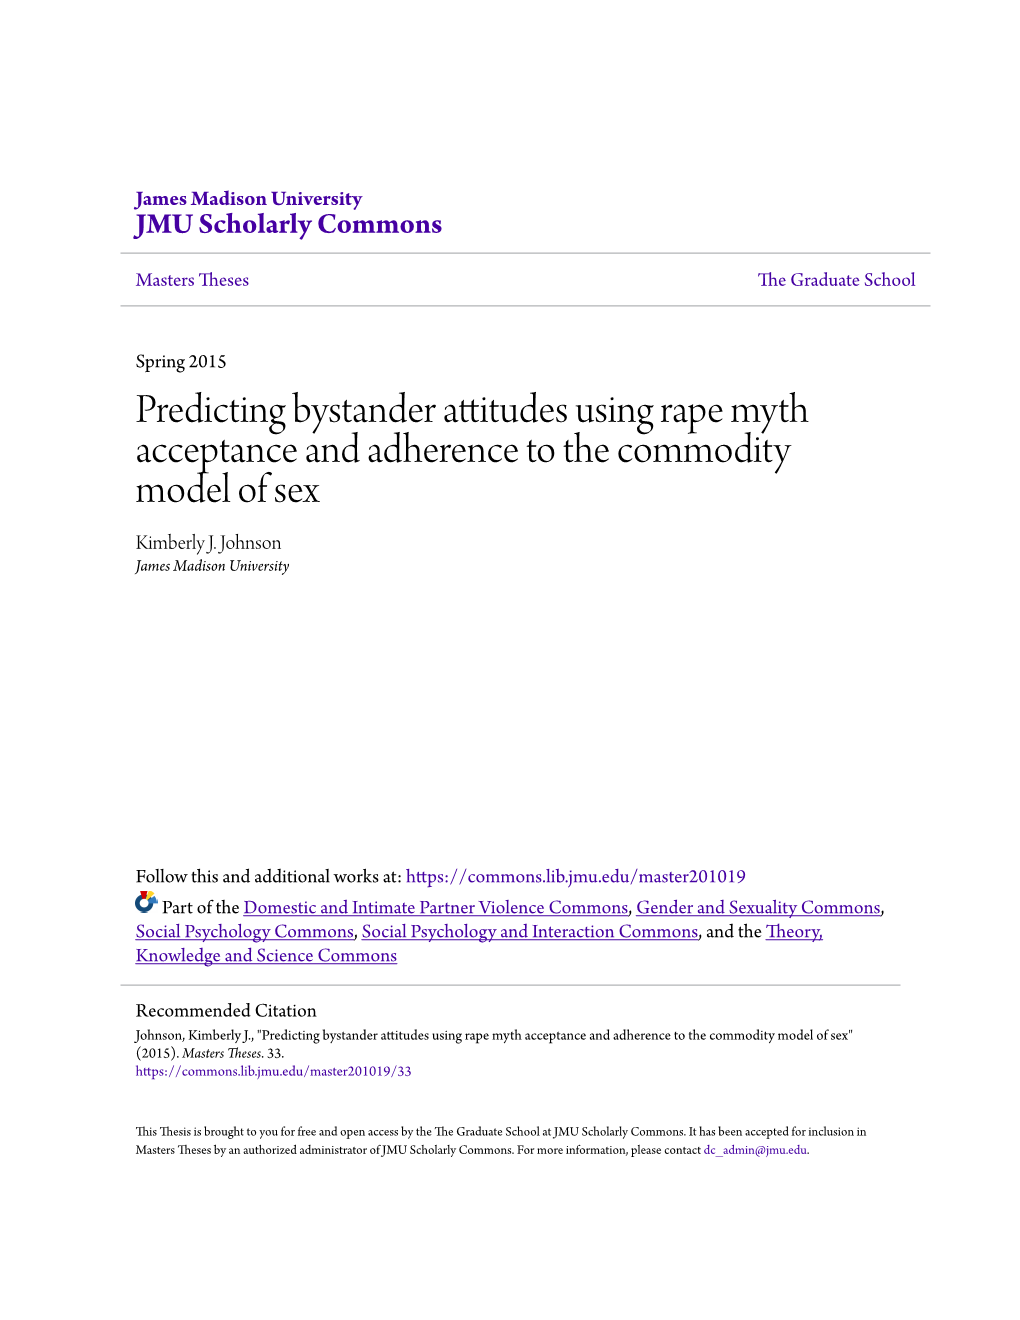 Predicting Bystander Attitudes Using Rape Myth Acceptance and Adherence to the Commodity Model of Sex Kimberly J